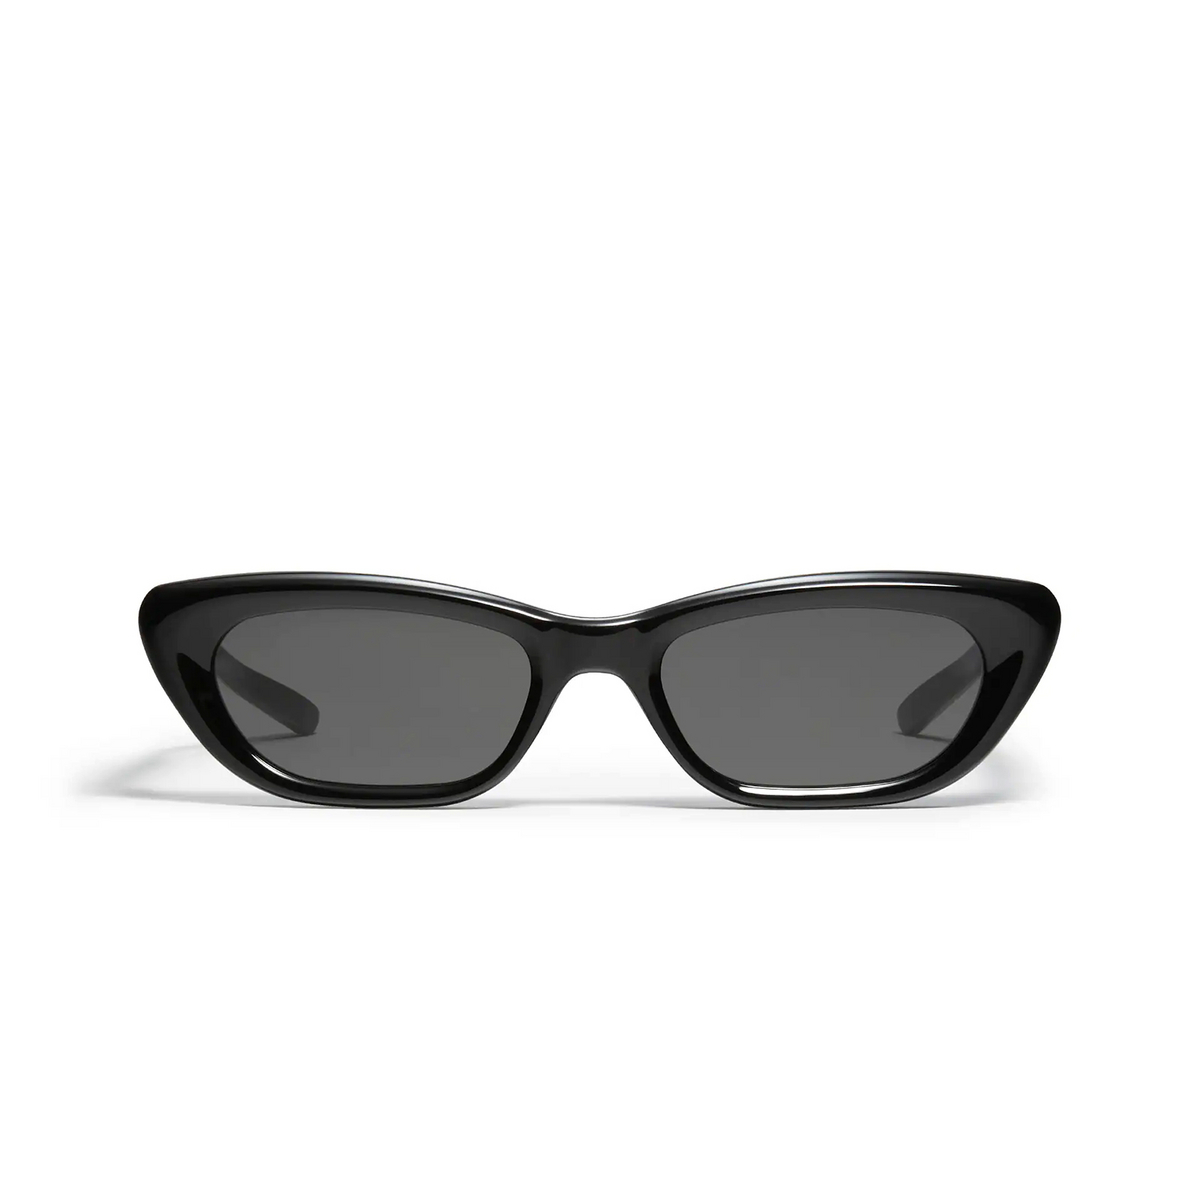 Gentle Monster 27AND 7 Sunglasses 01 Black - front view